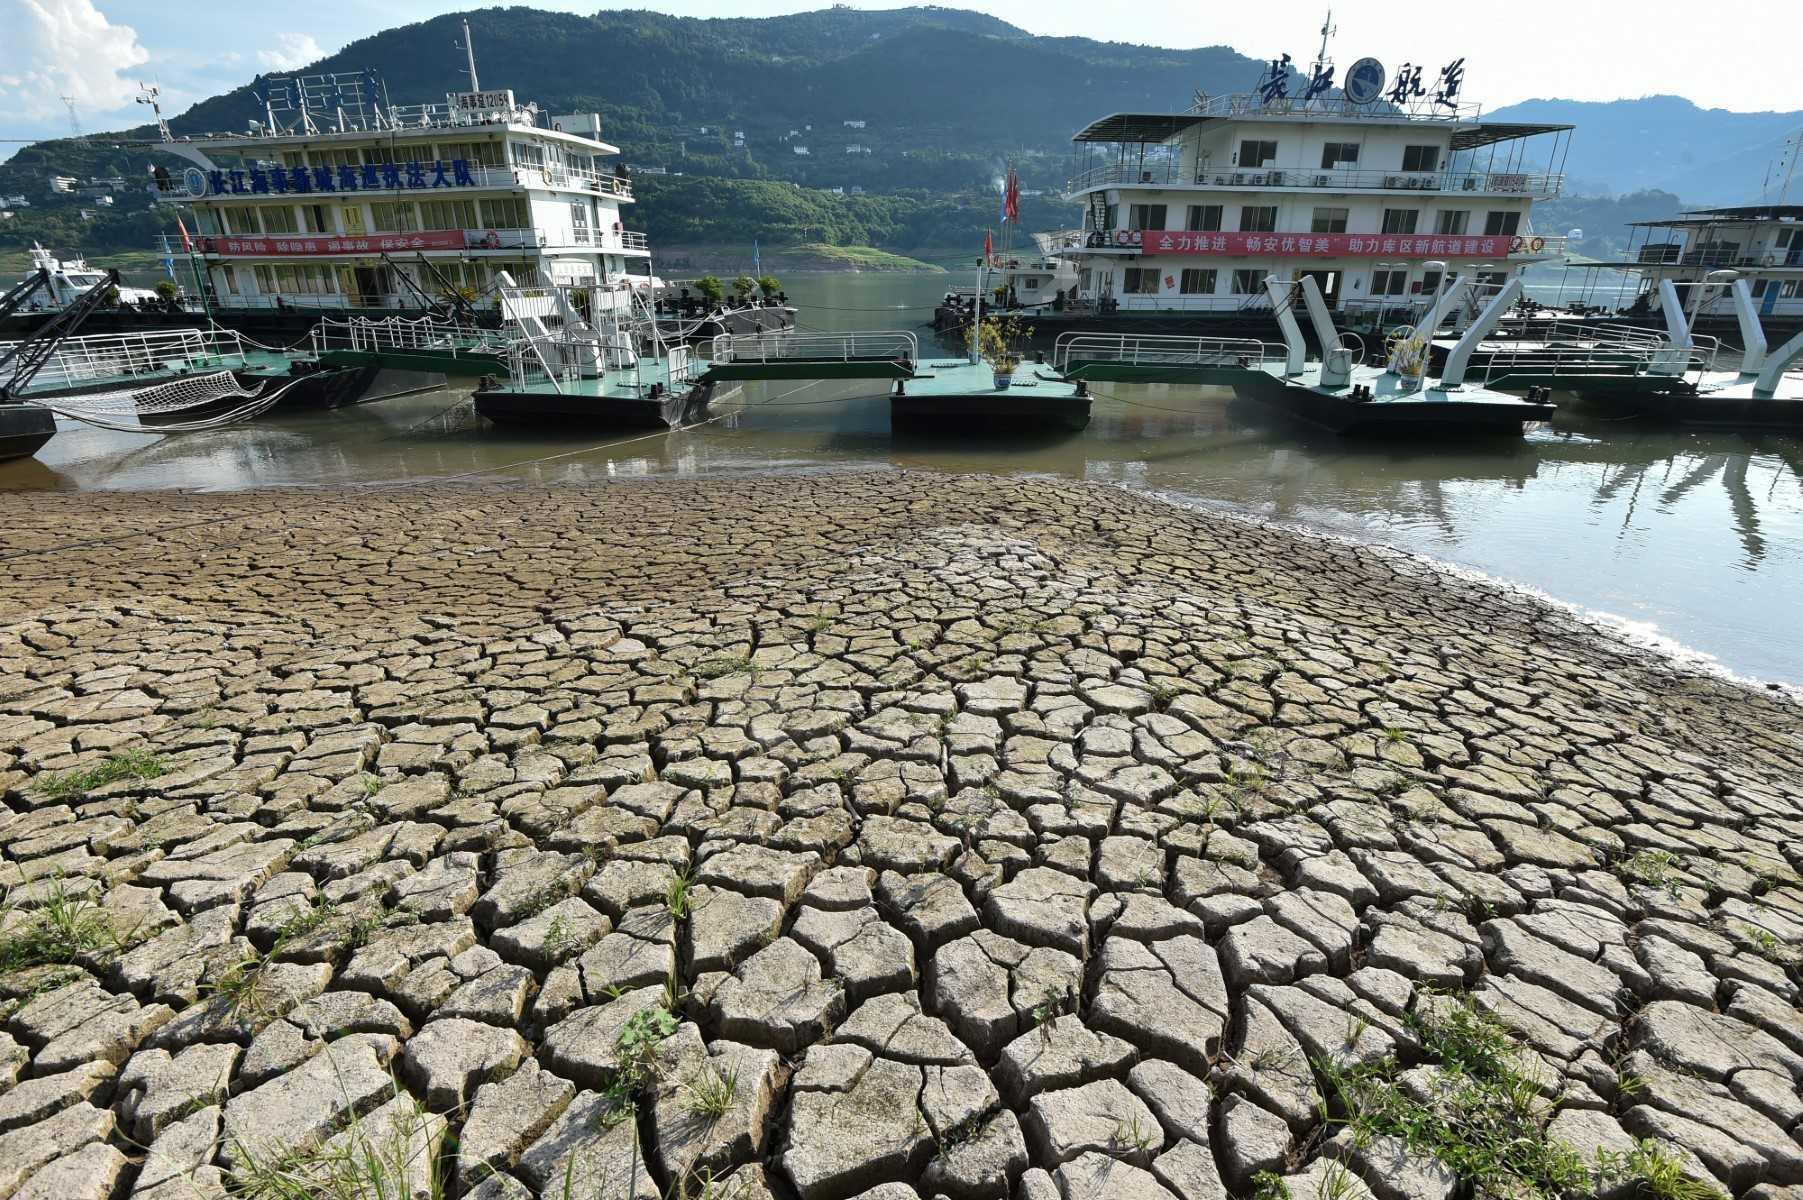 This photo taken on Aug 16 shows a section of a parched river bed along the Yangtze River in China's southwestern Chongqing. Photo: AFP